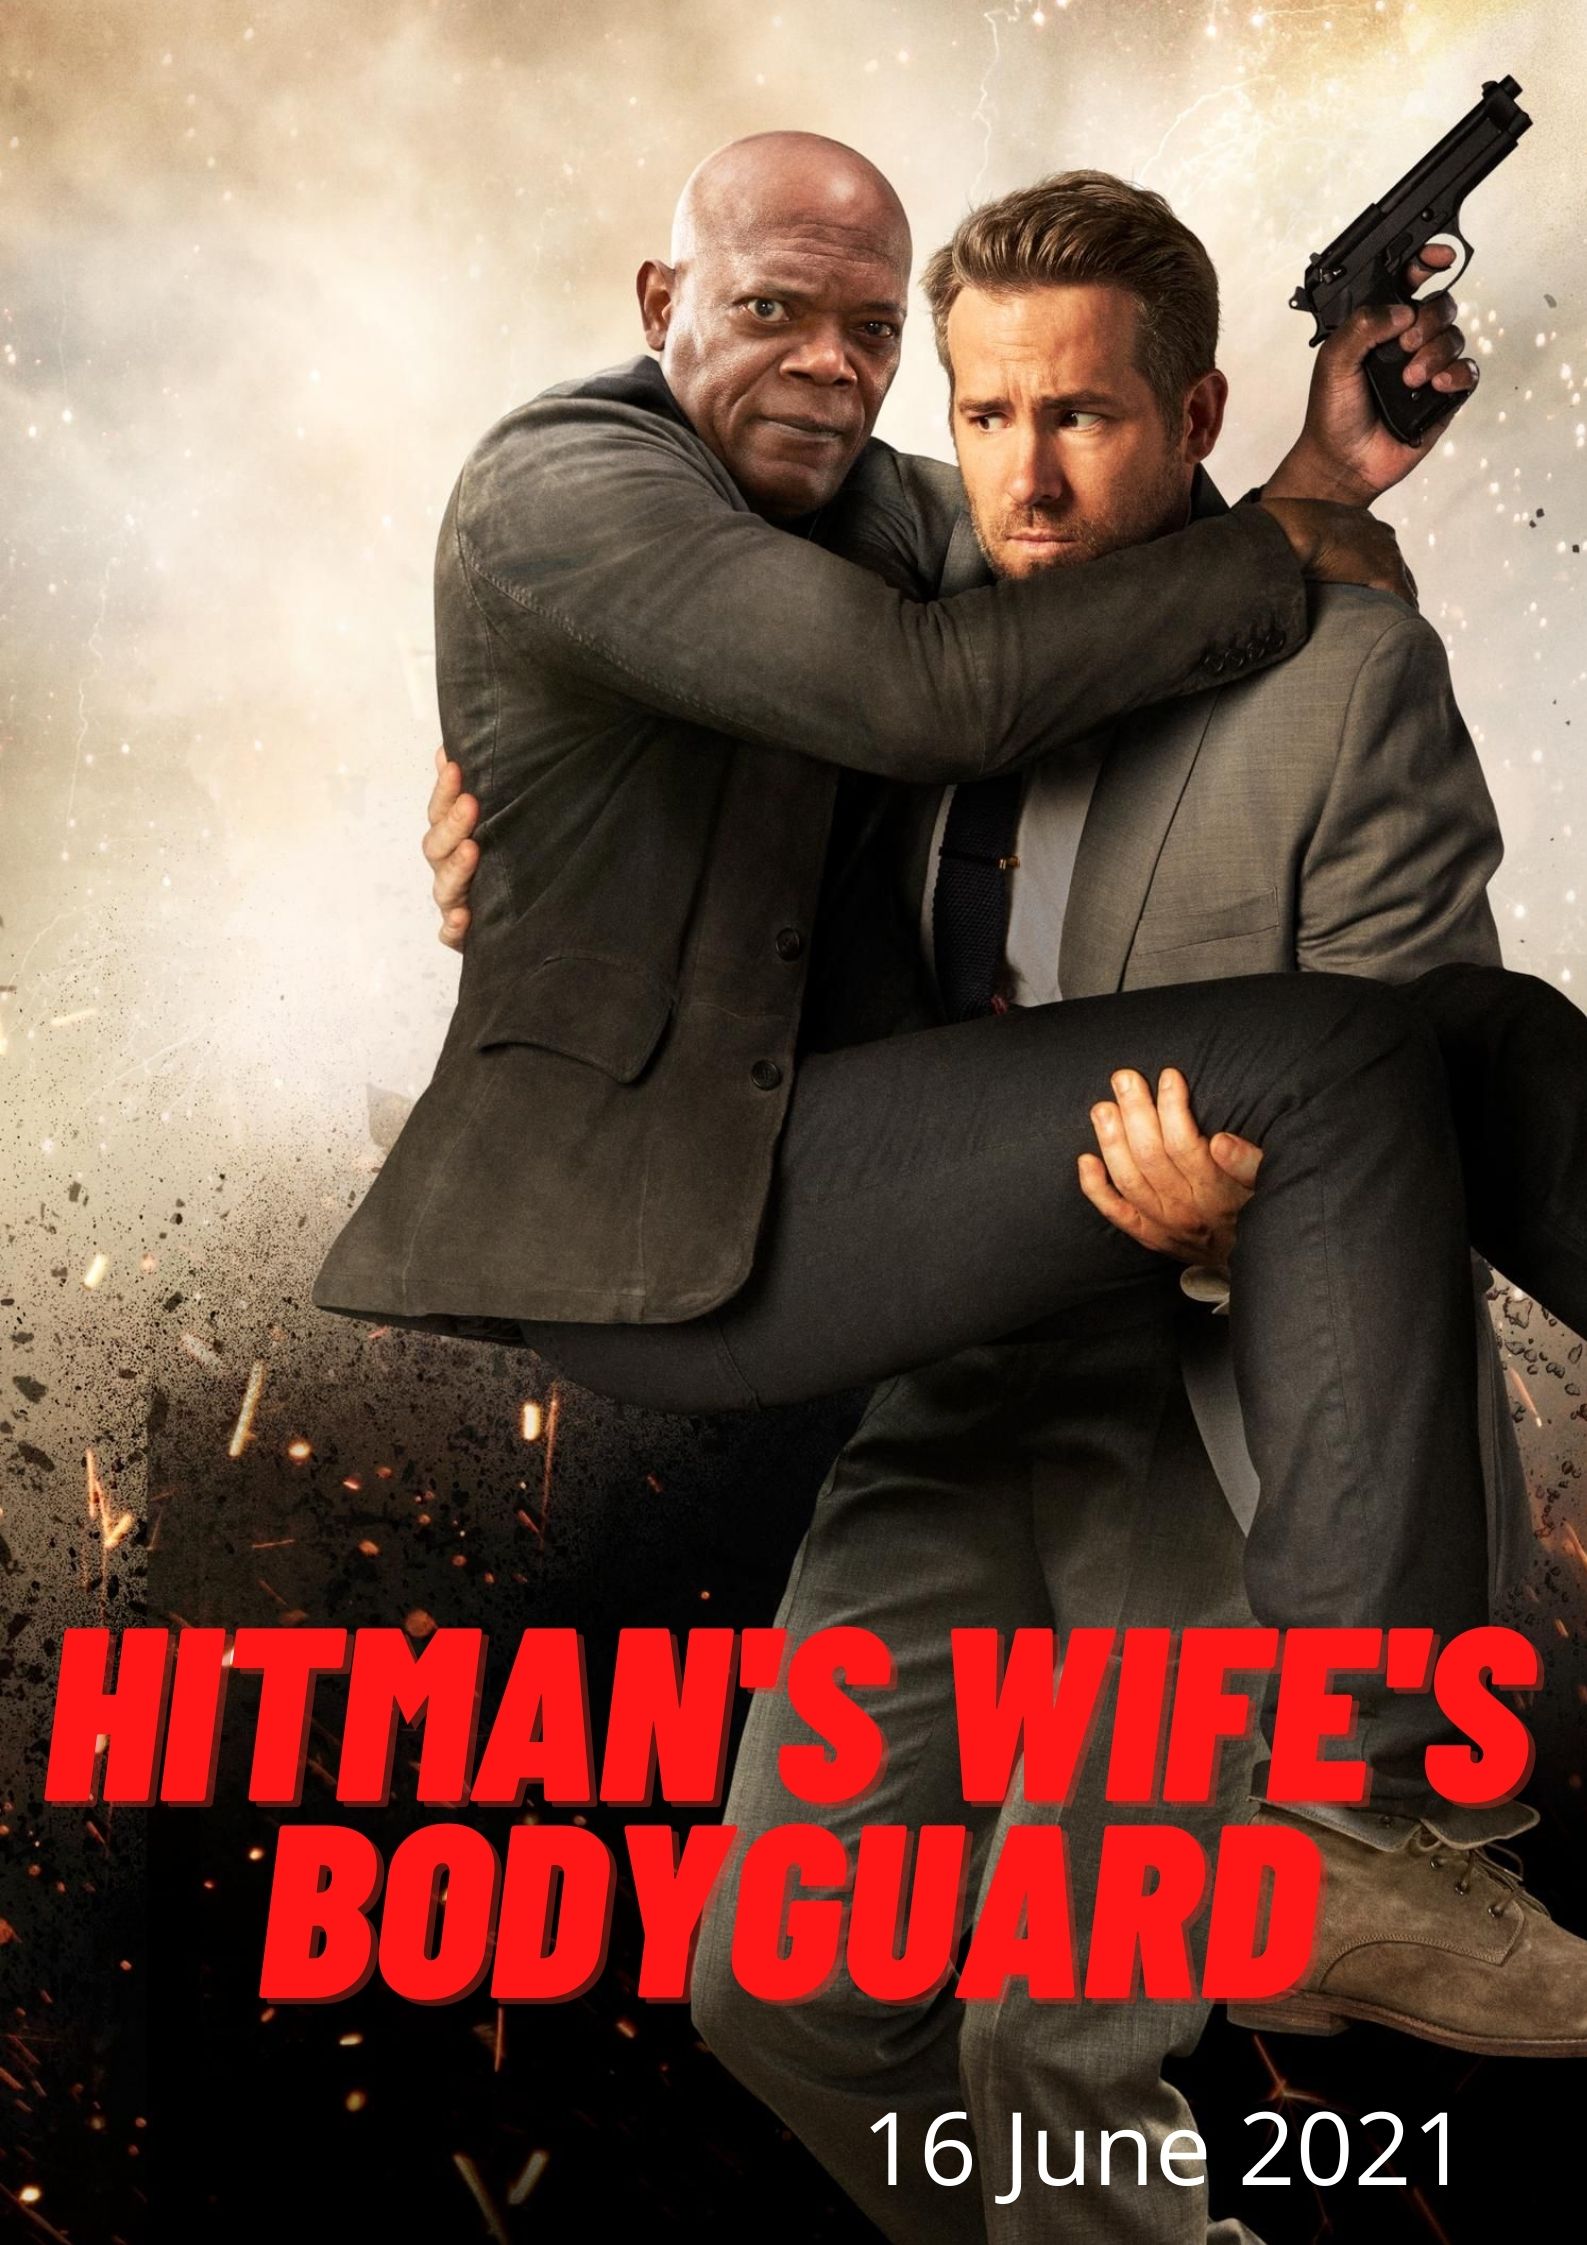 Hitman's Wife's Bodyguard Age Rating | Parents Guide for 2021 Film